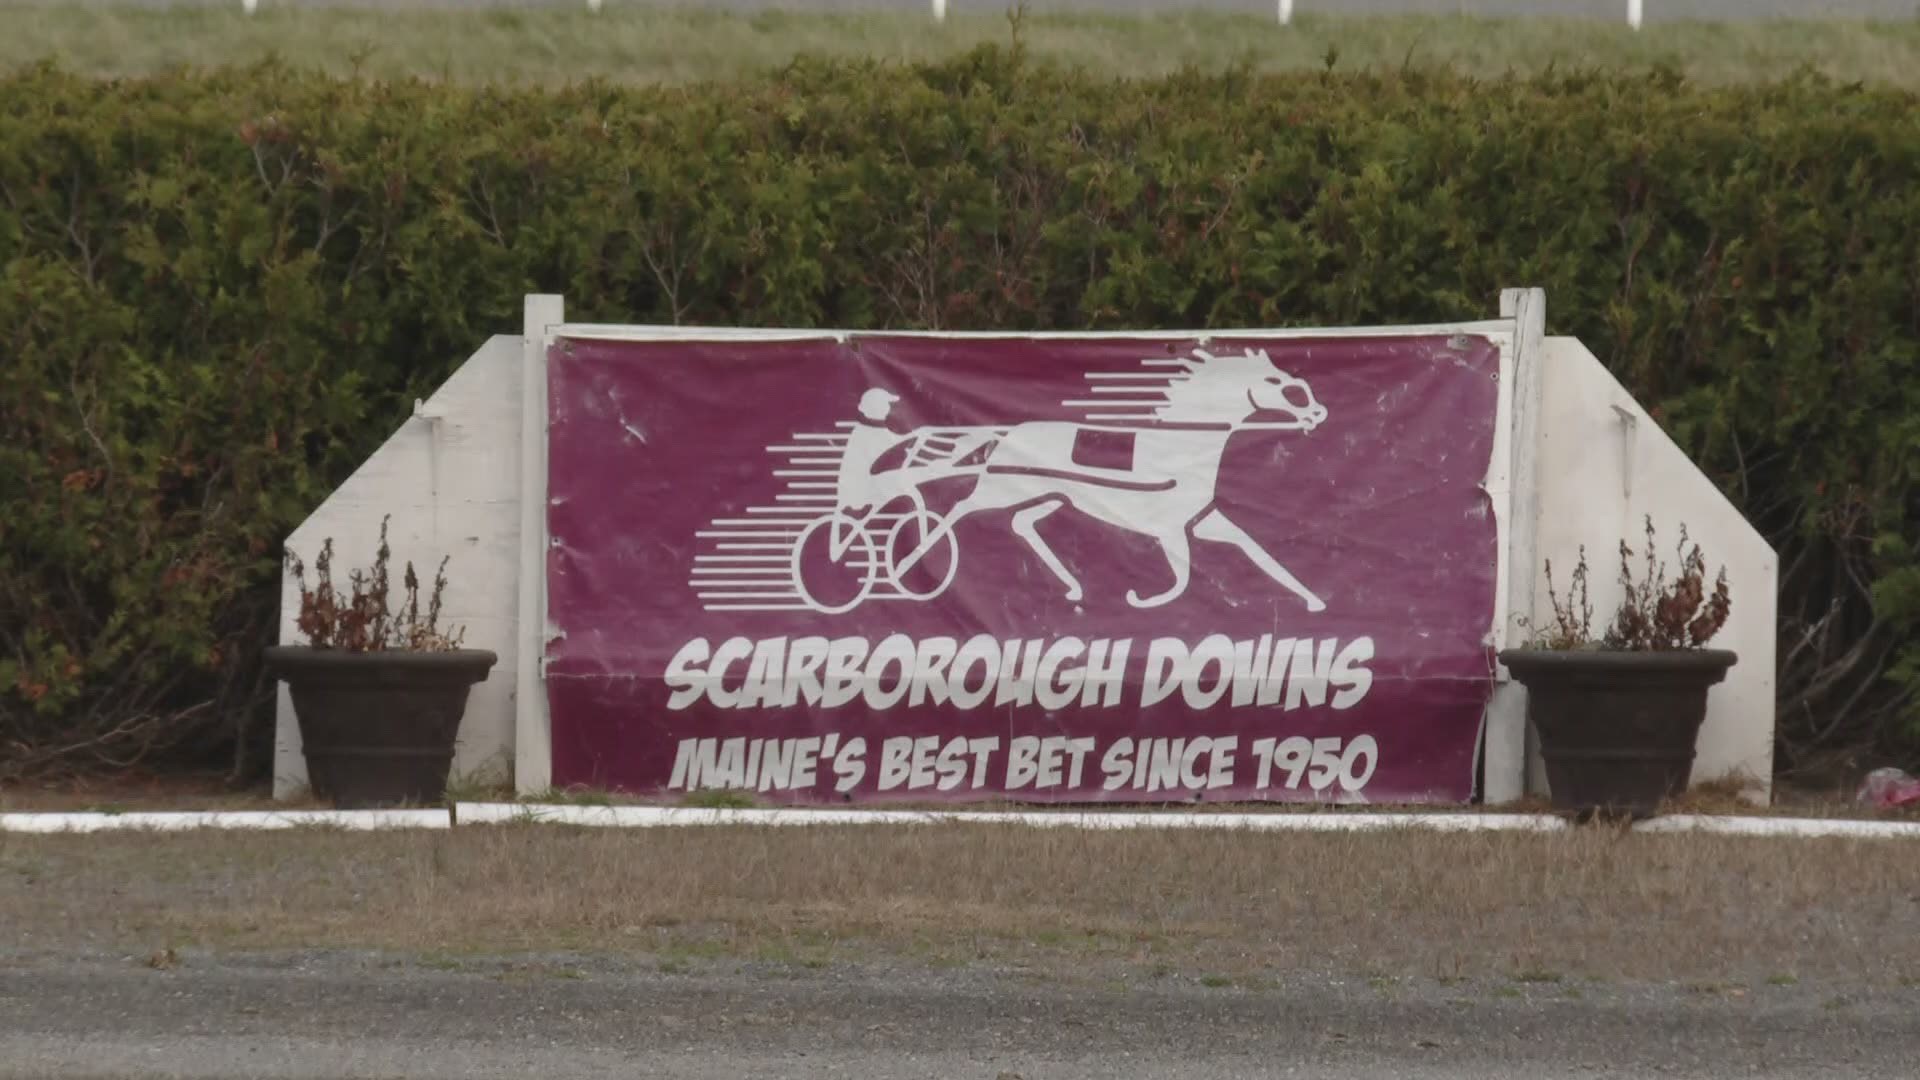 After 70 years of harness racing, the decision was made to end harness racing at the Scarborough Downs.